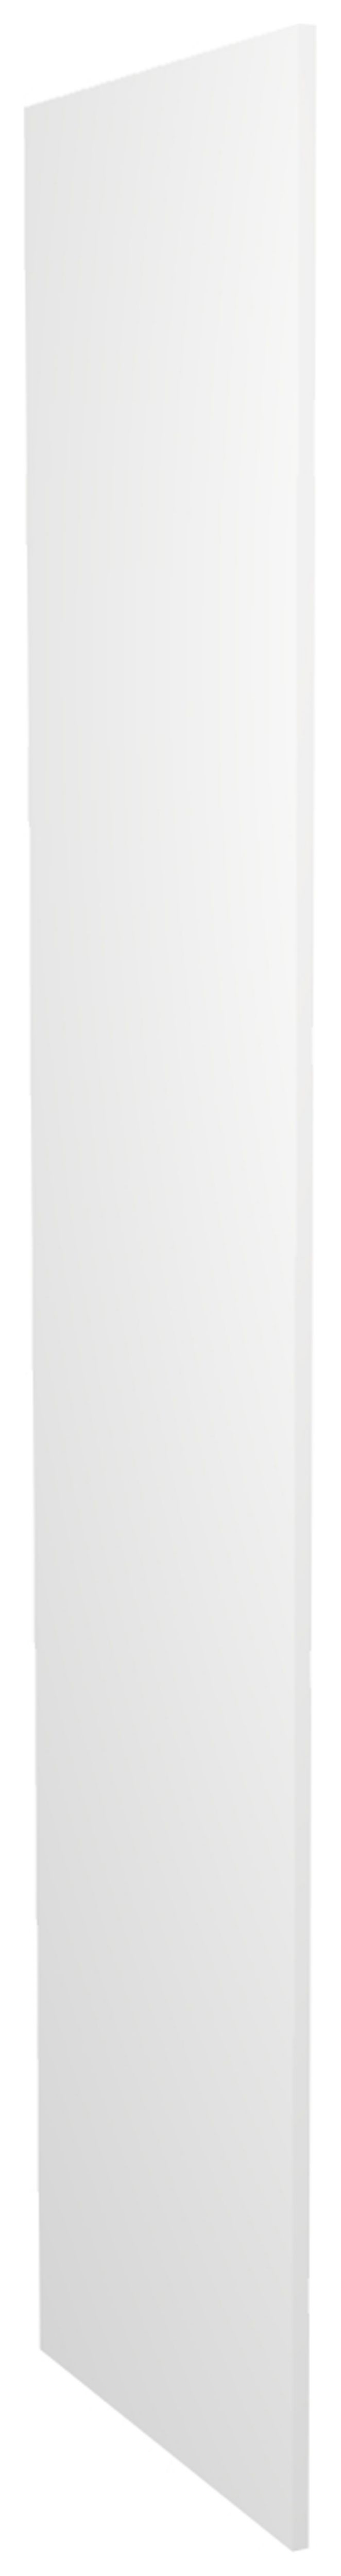 Image of Wickes Hertford Gloss White Tower Decor End Panel - 18mm